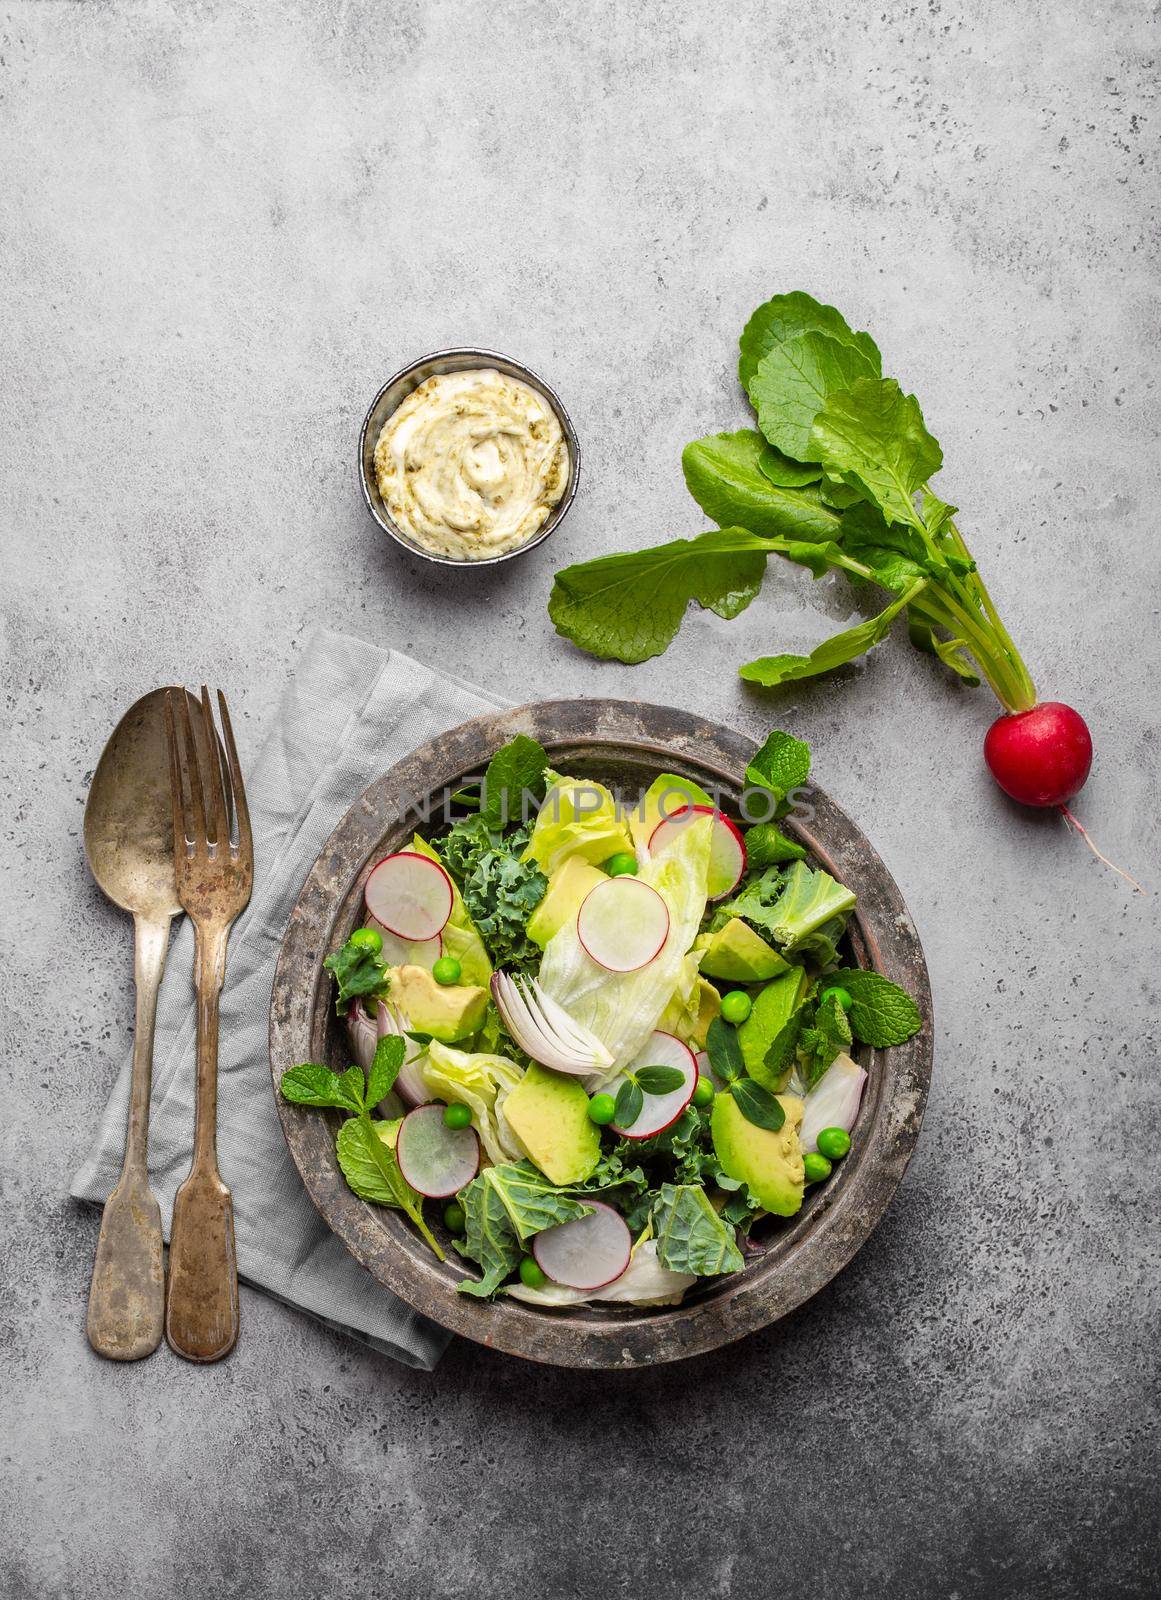 Green organic vegetables salad with avocado, kale, green peas, sprouting herbs in rustic bowl served with sauce, gray concrete background, close-up, top view. Healthy clean eating, diet/detox concept